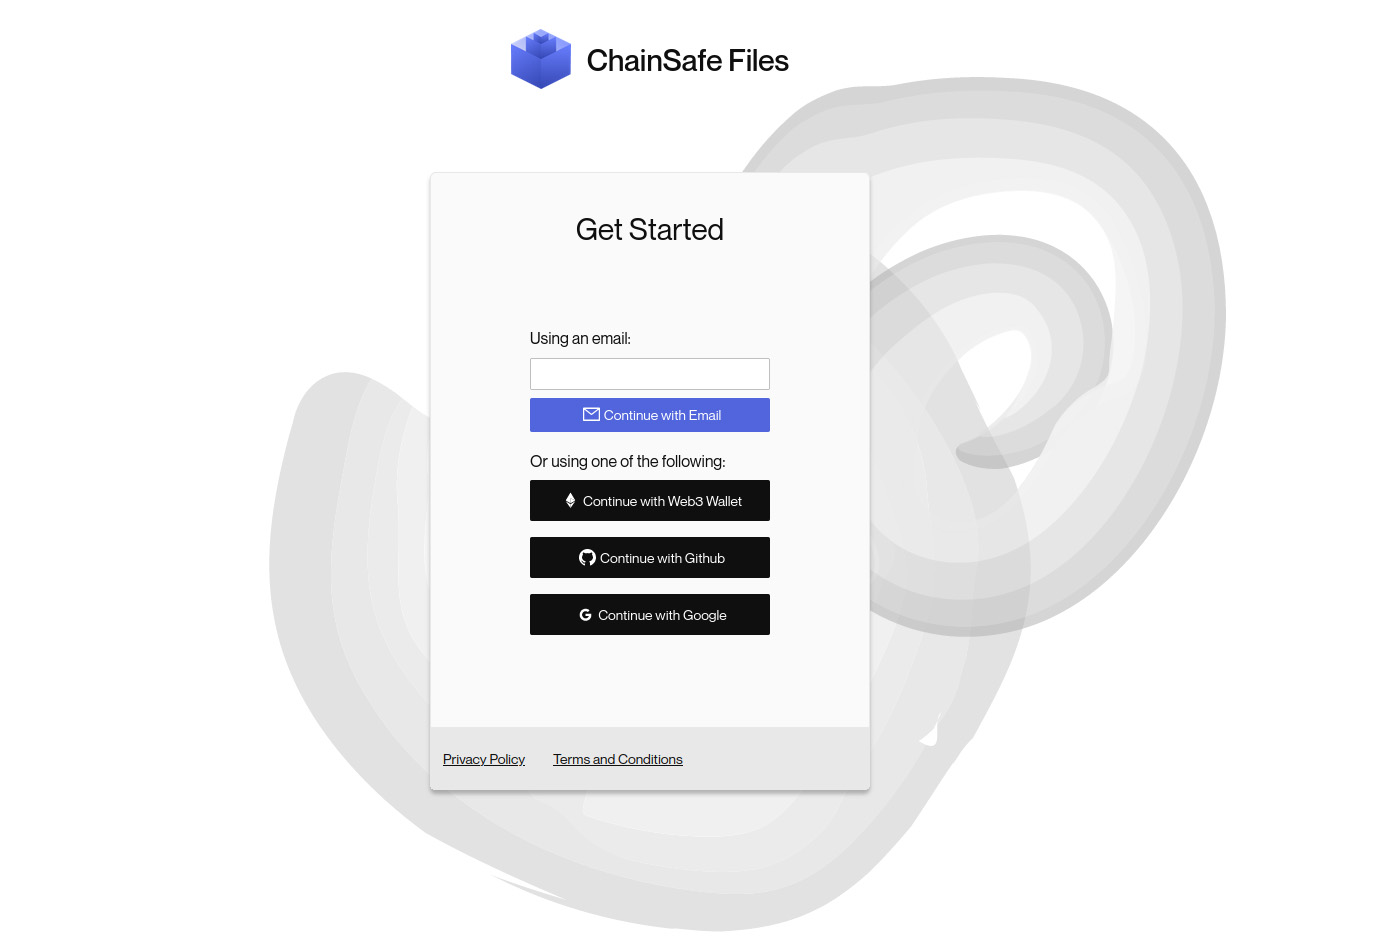 Get Started with ChainSafe Files